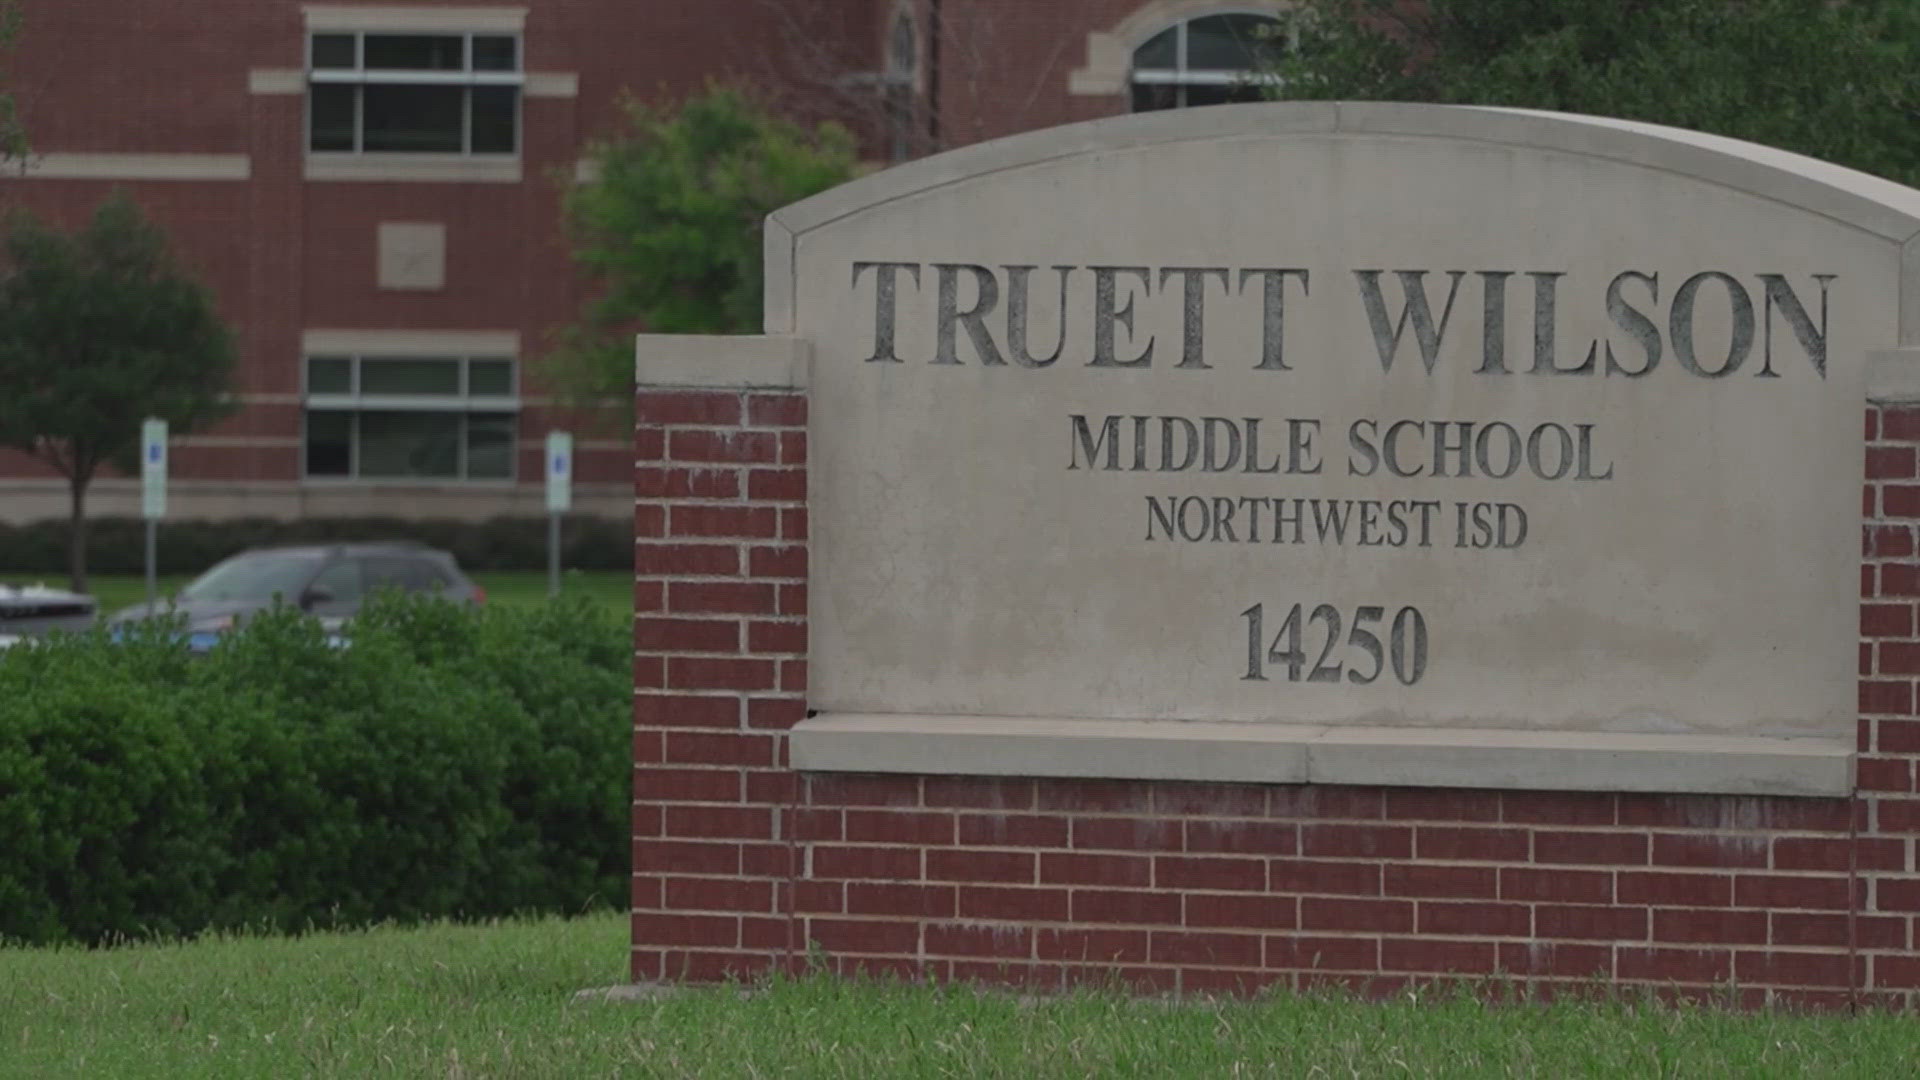 Three students have been officially charged with a felony terroristic threat. Absences dating back to last Thursday are now excused after parents kept kids at home.